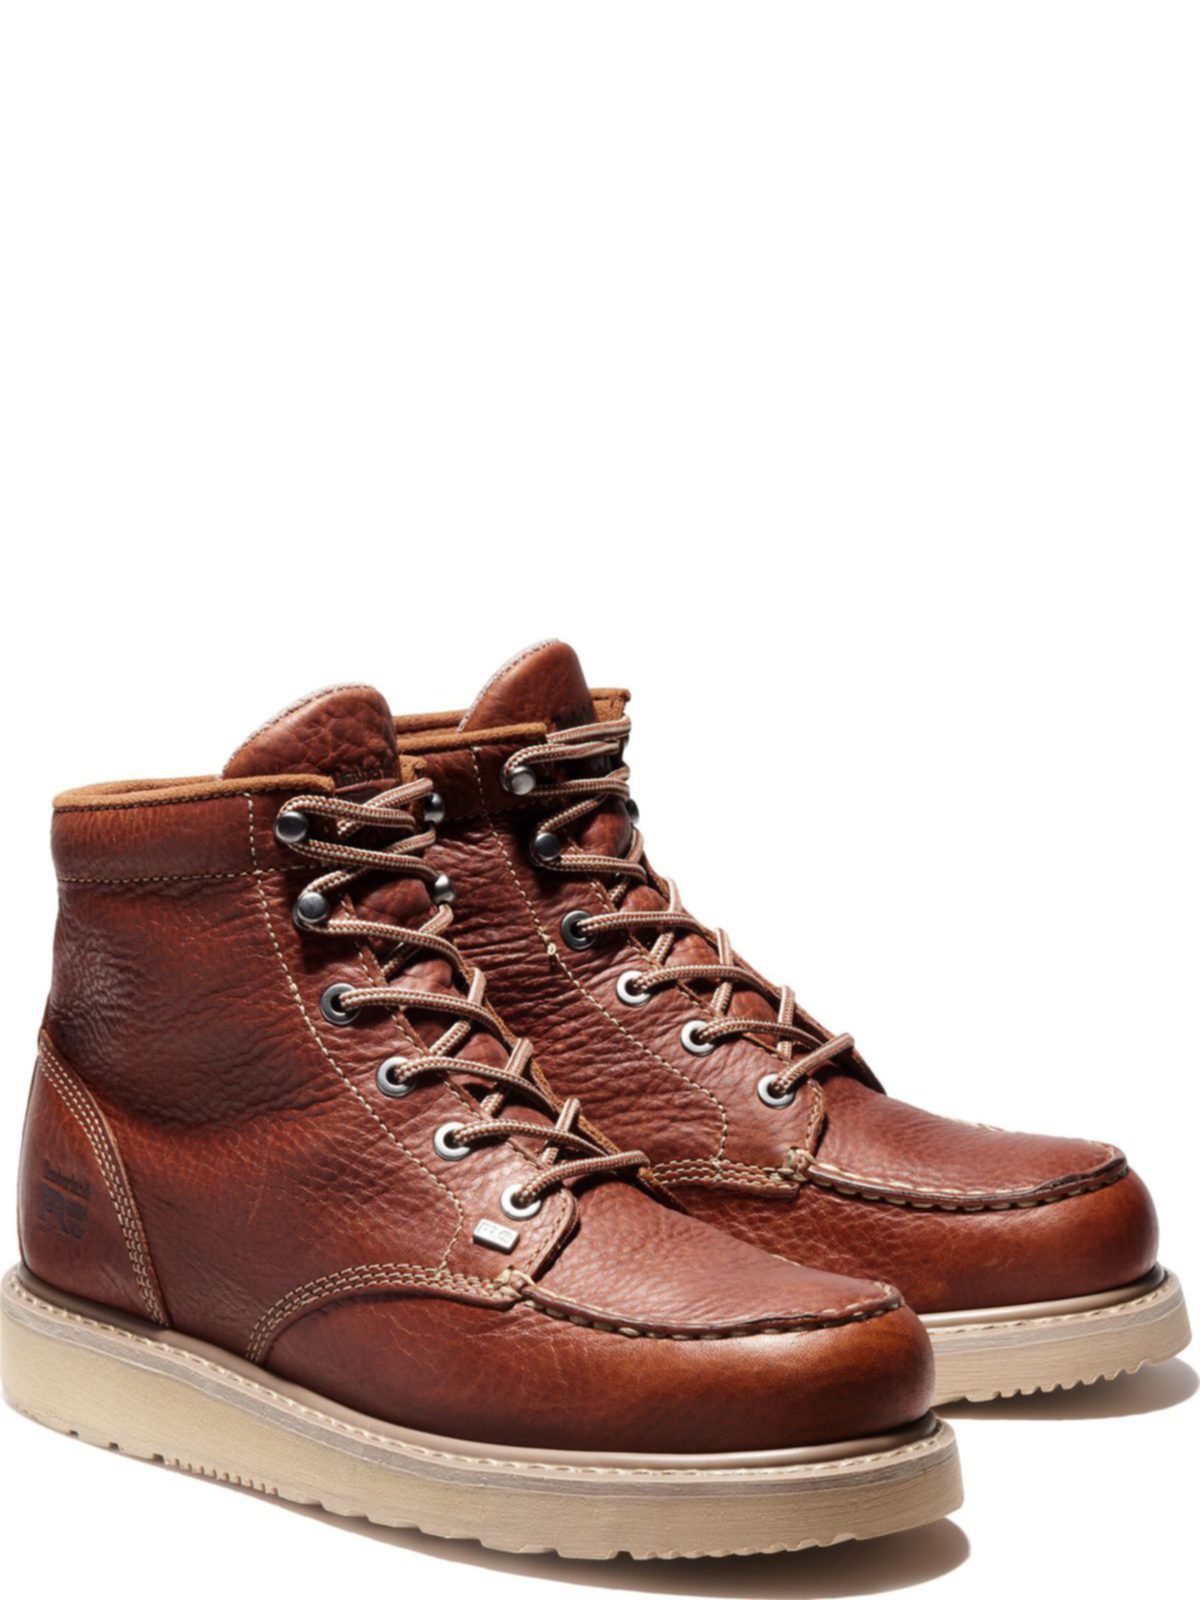 Shop Timberland Mens 6" Barstow Wedge Boots TB089647214 | Save 20% + Free Shipping BootAmerica